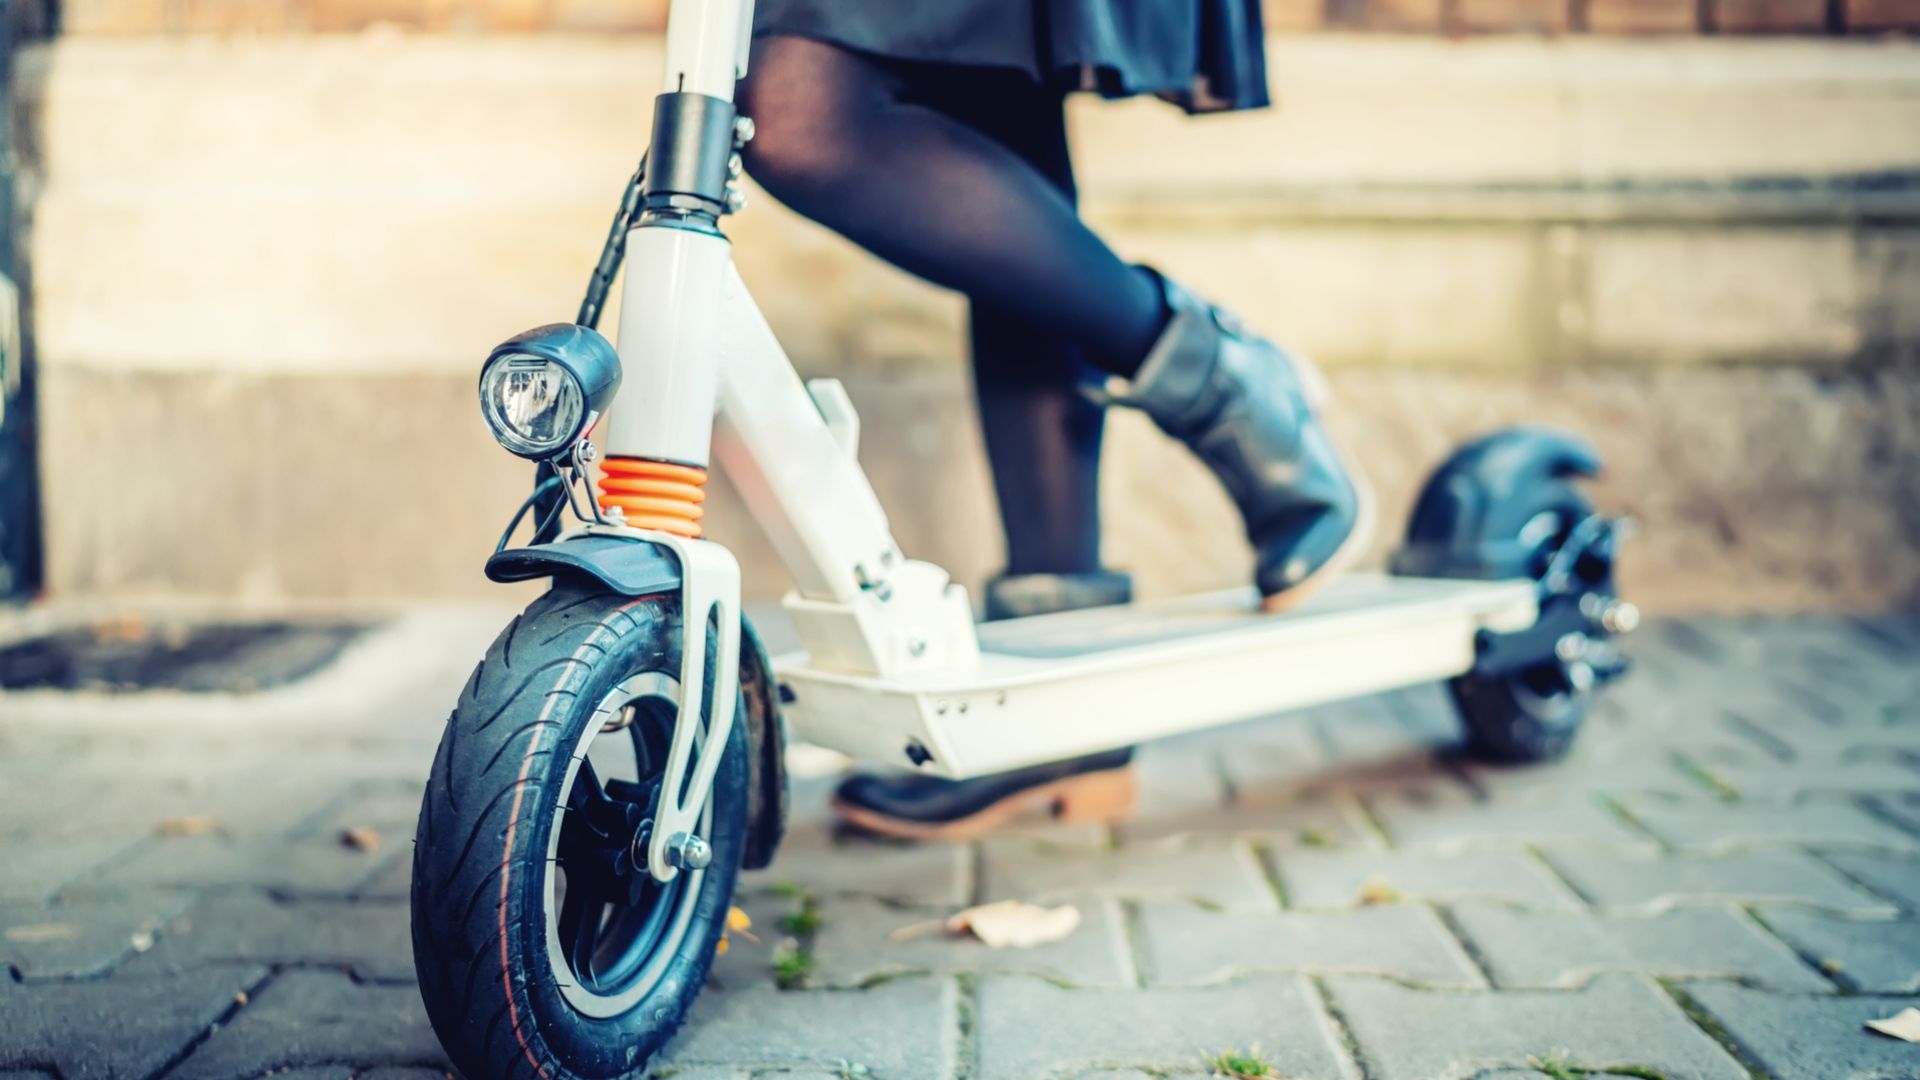 What To Look For In An Electric Scooter